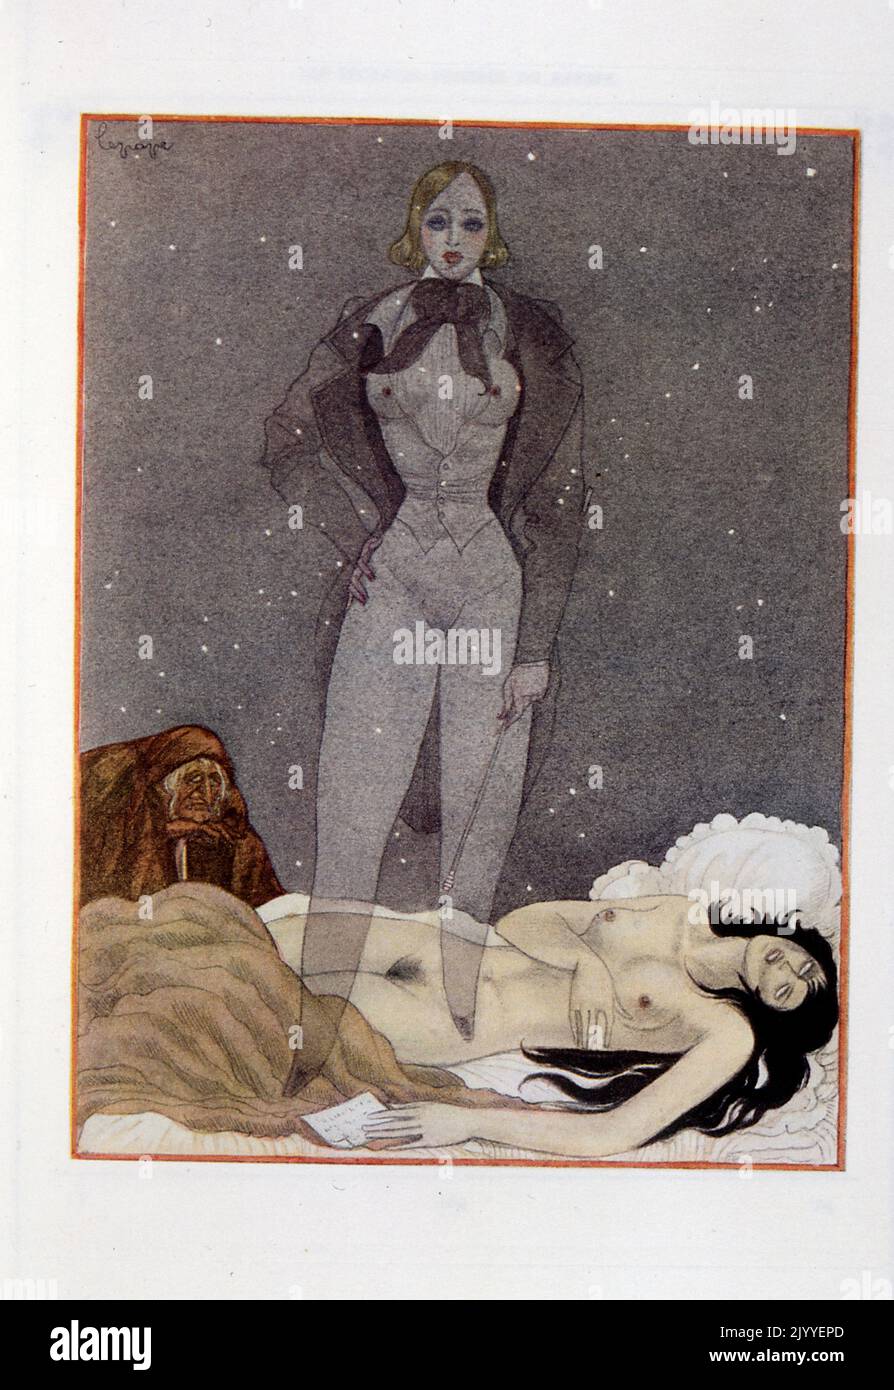 Illustration depicting a fantastical image of a woman's spirit emanating from her dead body. By Georges Lepape (1887-1971), French poster artist, illustrator and fashion designer Stock Photo